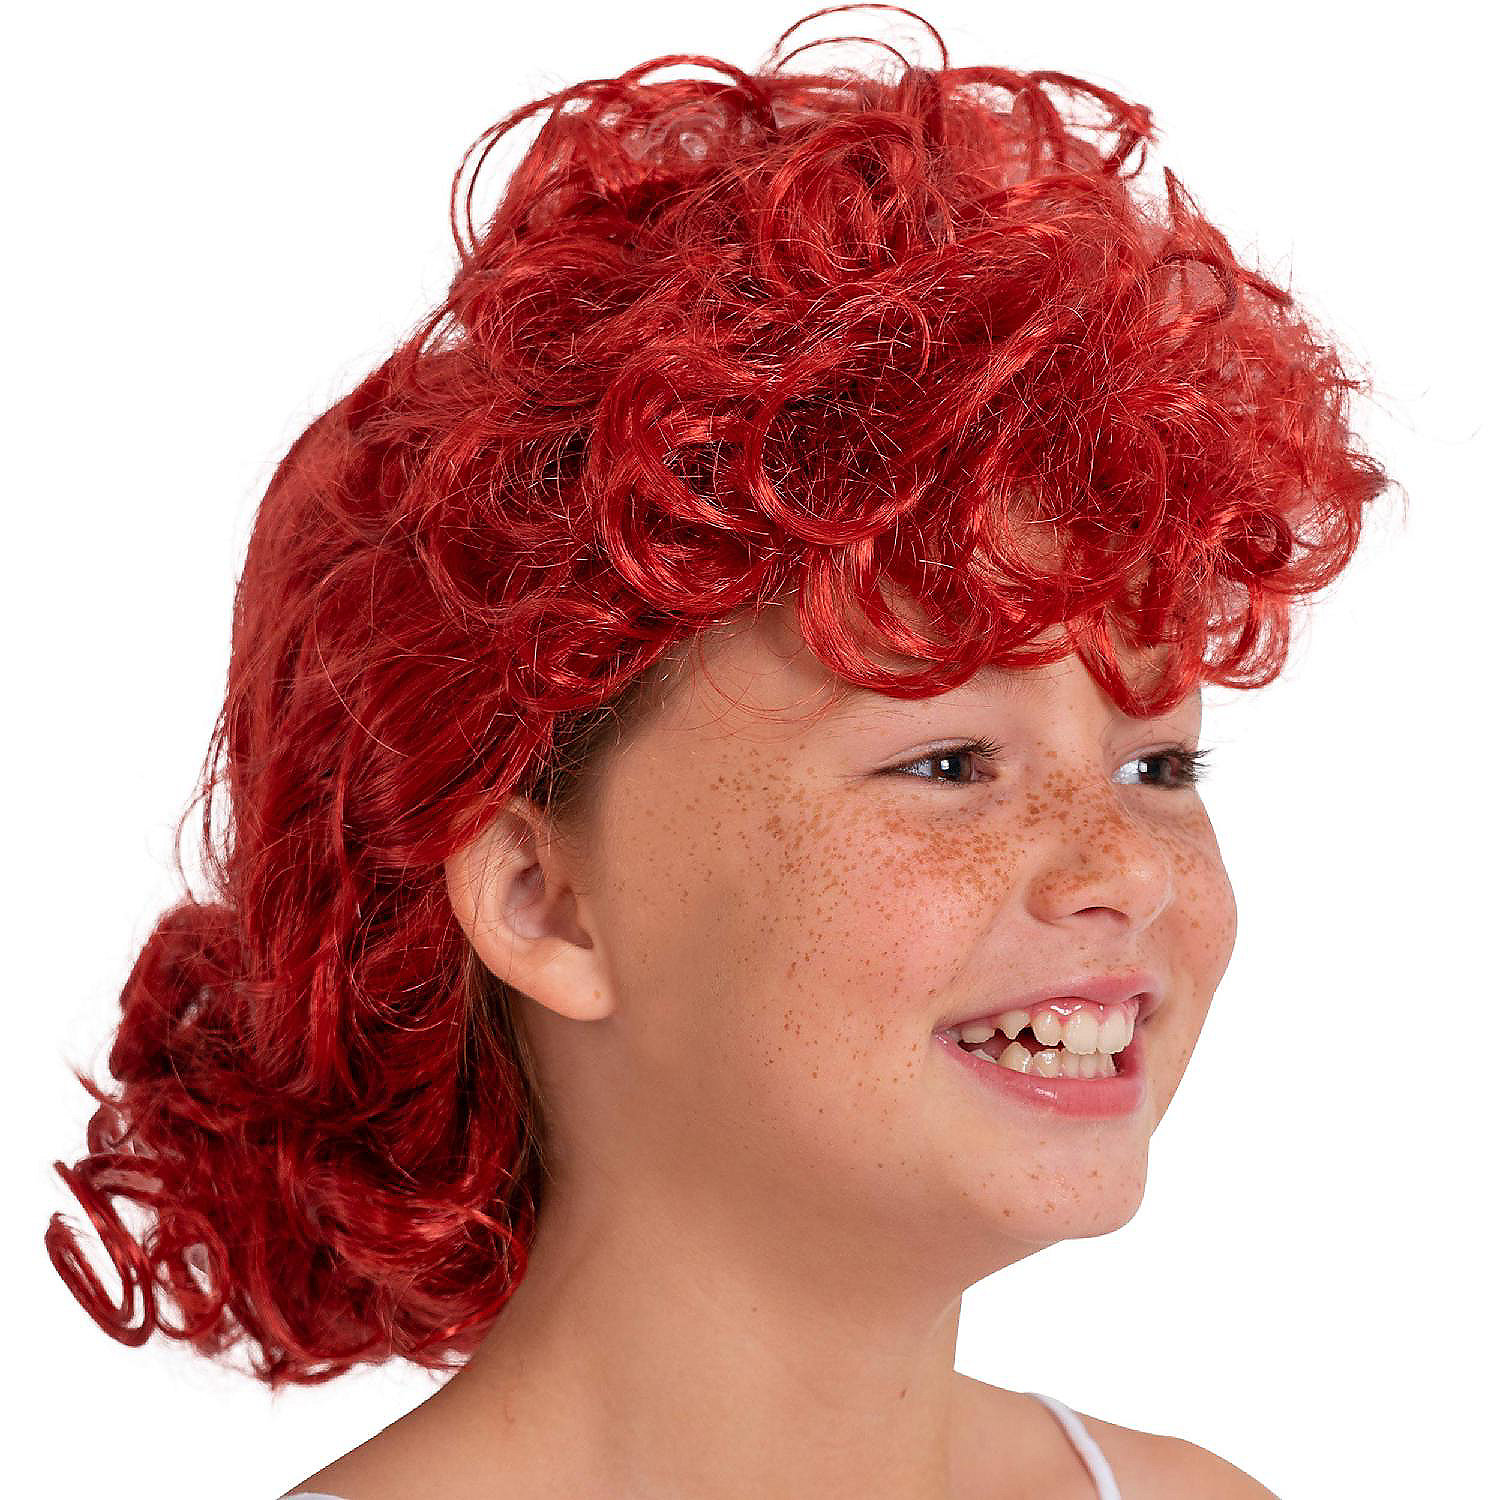 Glorious Blind nakke Auburn Lucy Costume Wig - Red 50s Housewife Costume Hair Updo Wigs  Accessories for Women and Girls | Oriental Trading